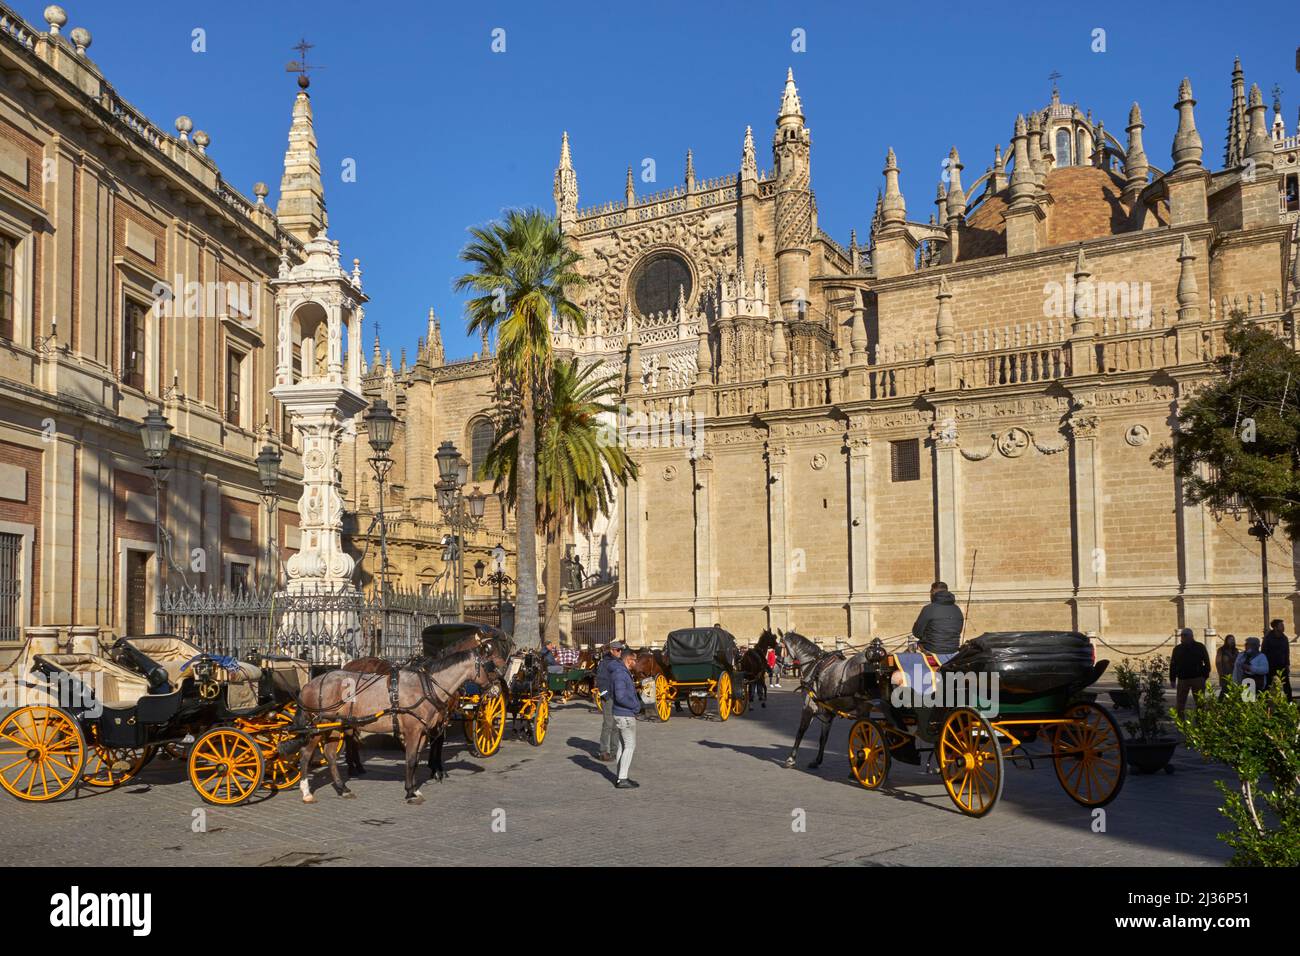 Horse and carriage park, Seville Catherdral, Andalusia, Spain Stock Photo